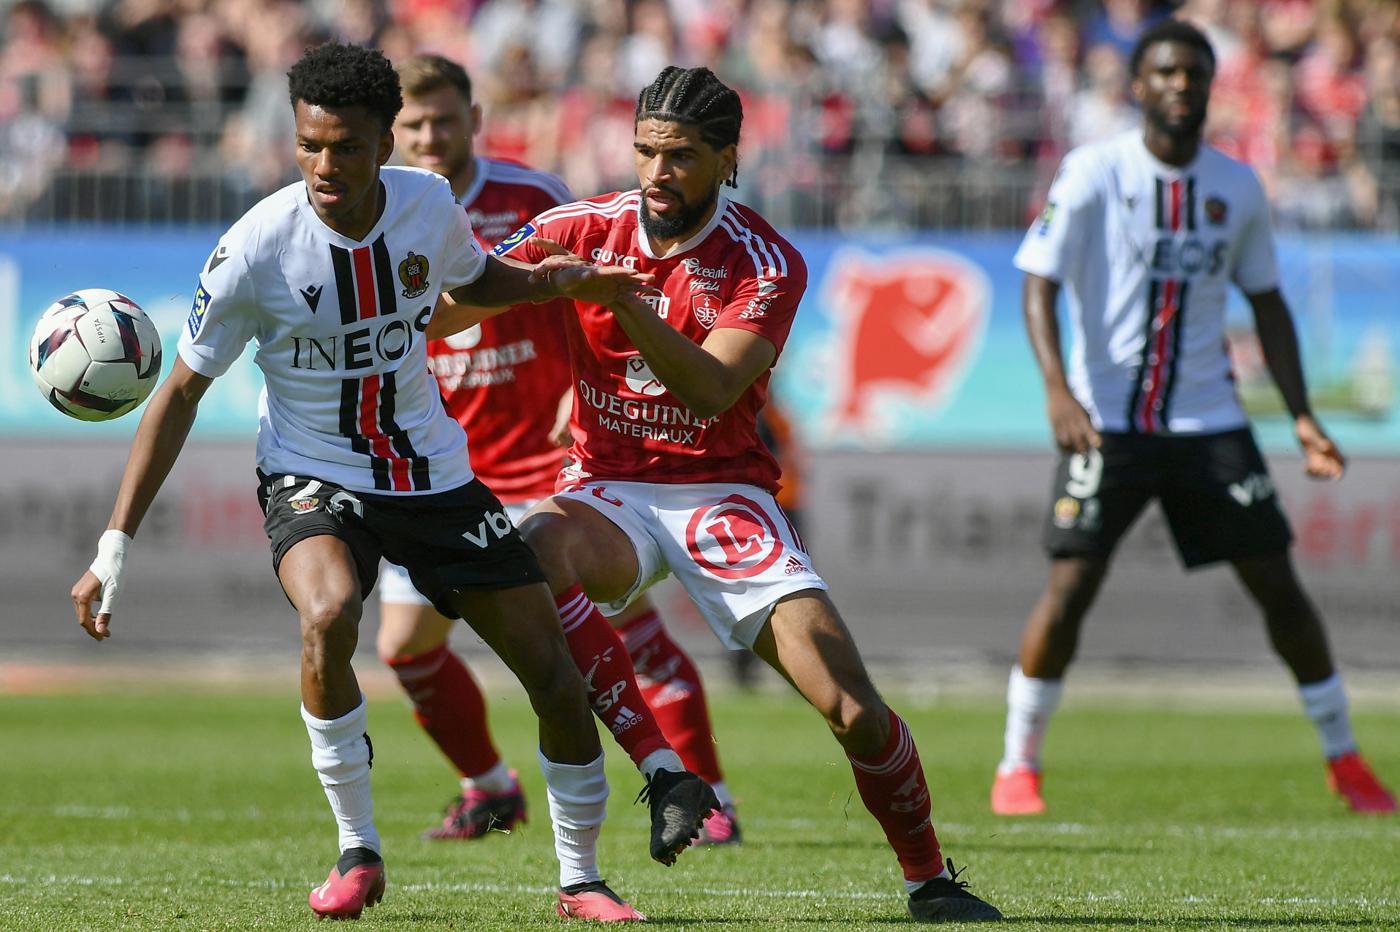 Brest - Nice - 1:0. French Championship, round 31. Match review,